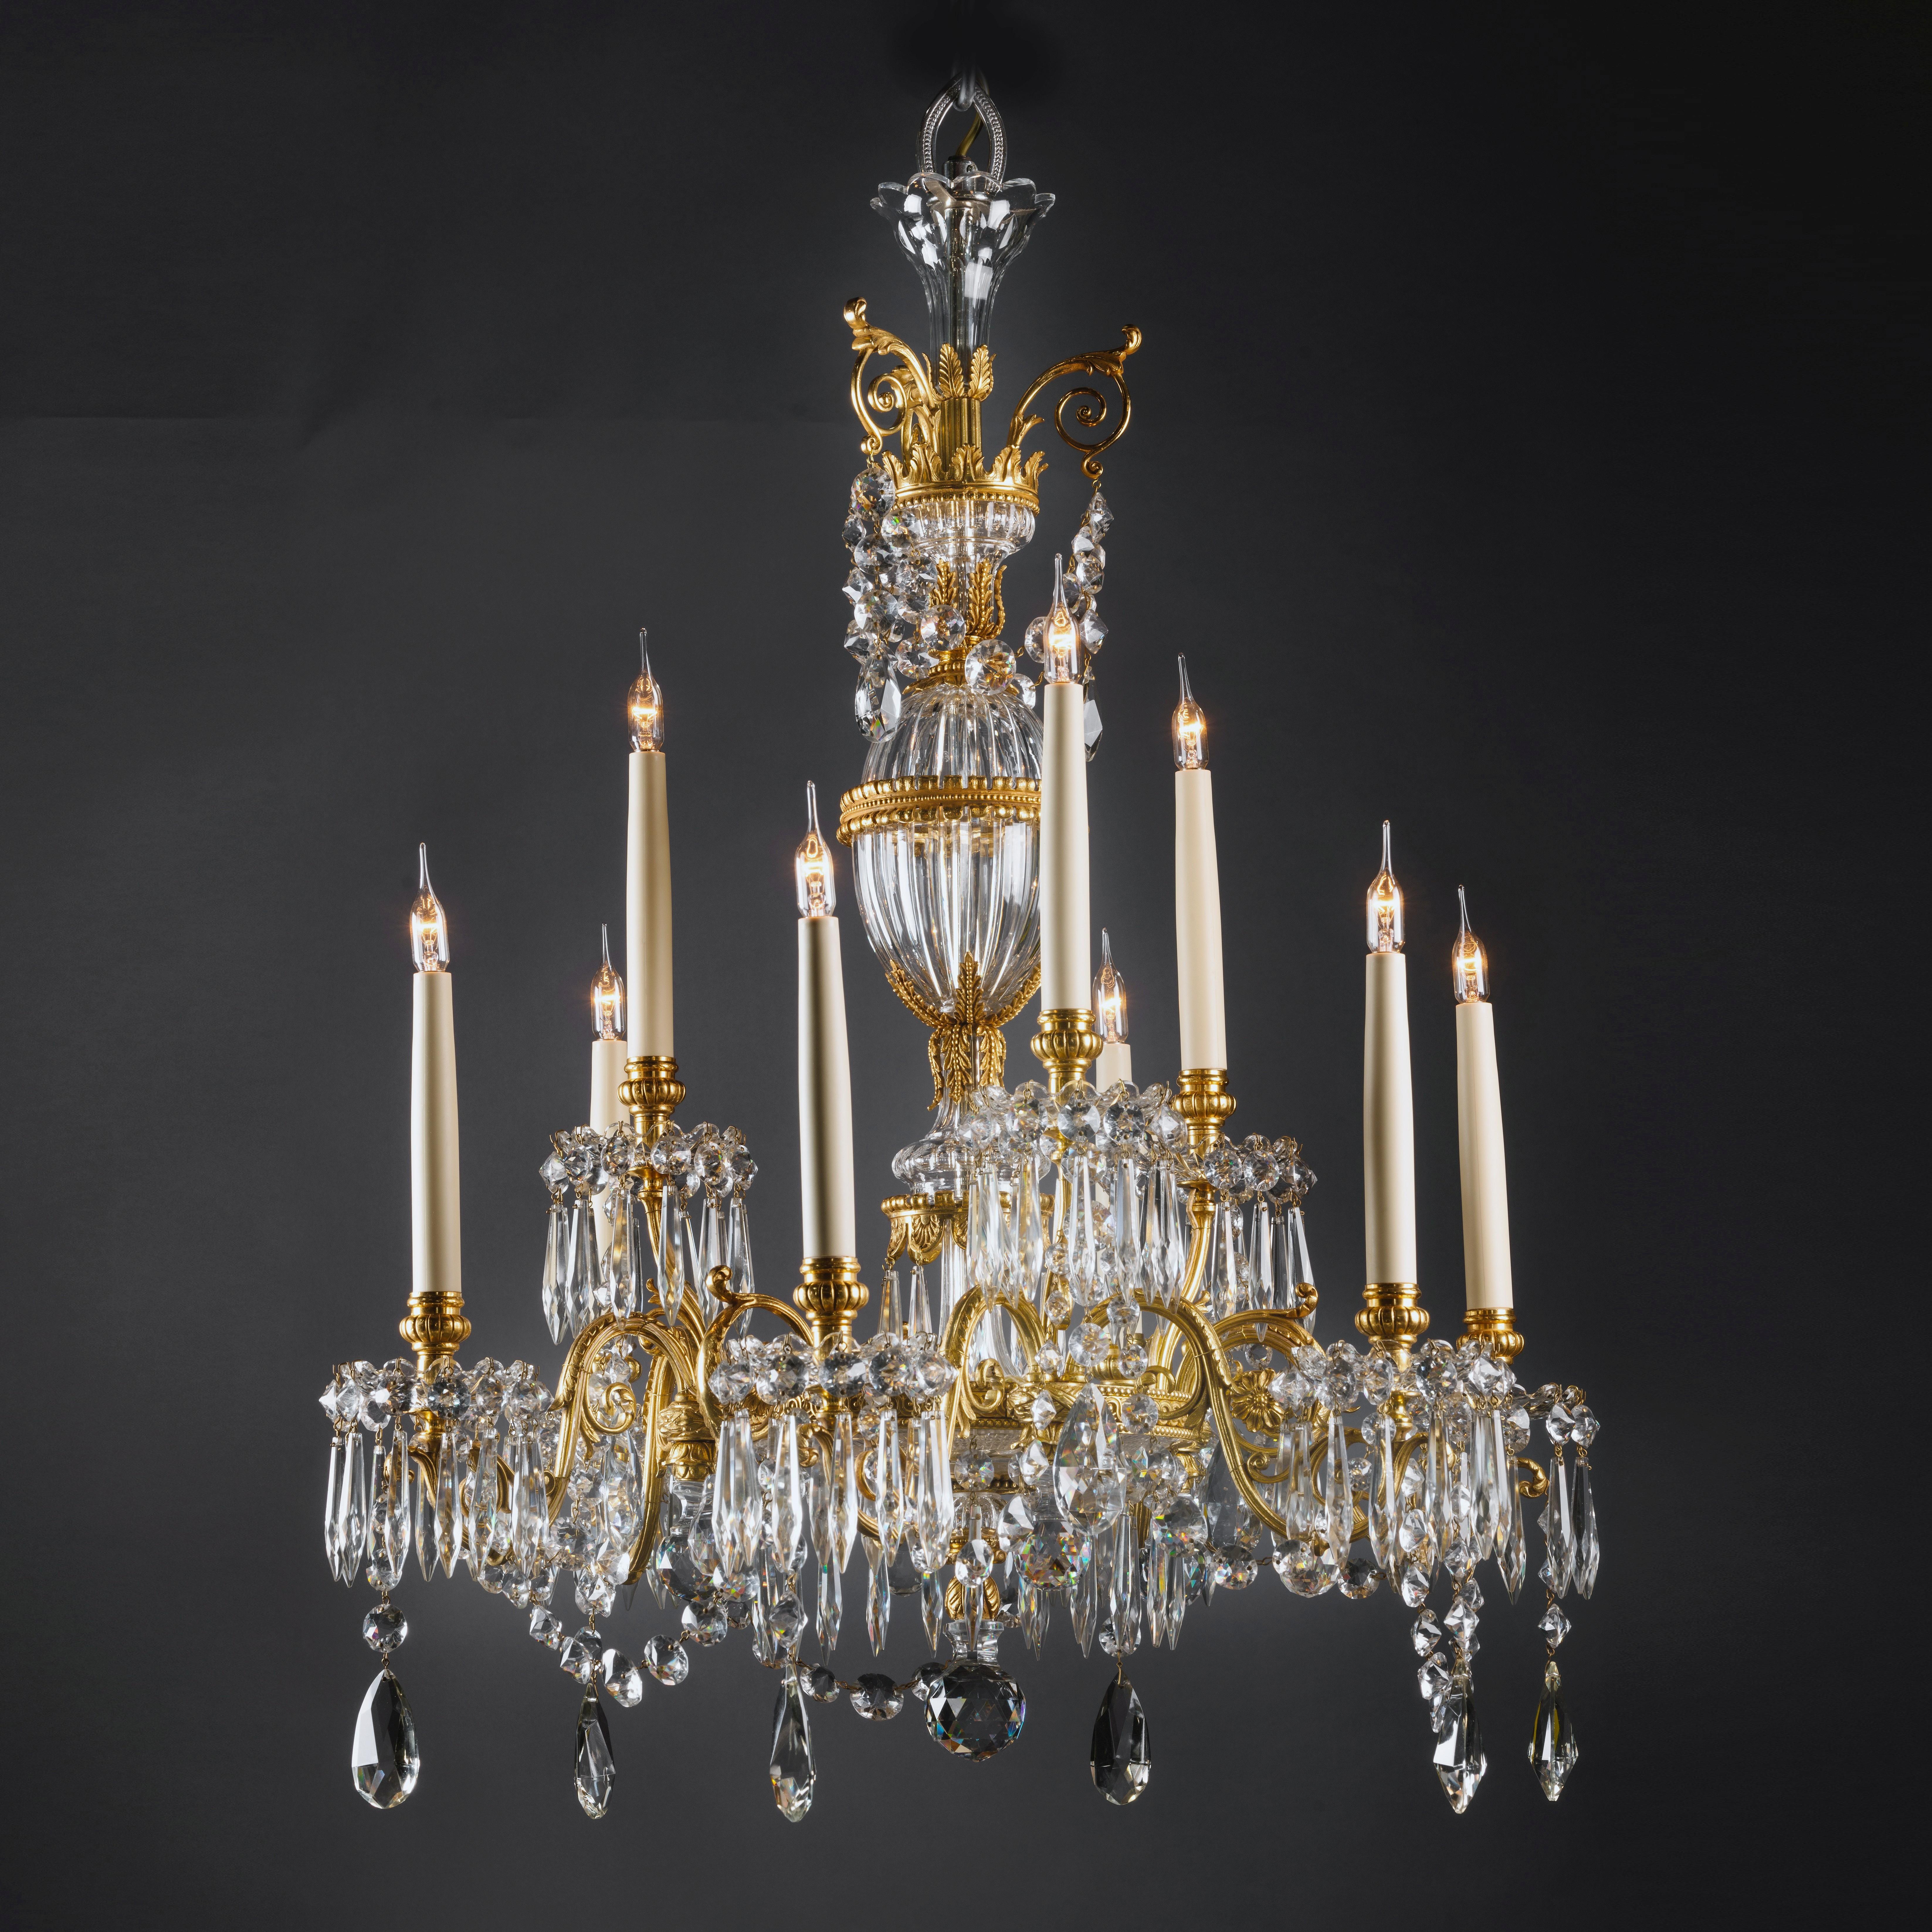 A fine gilt bronze, cut and moulded glass nine-light chandelier by Perry & Co.

This elegant English chandelier has a moulded glass ovoid and baluster stem with gilt bronze circlet, surmounted by a scrolling gilt bronze acanthus corona, above a